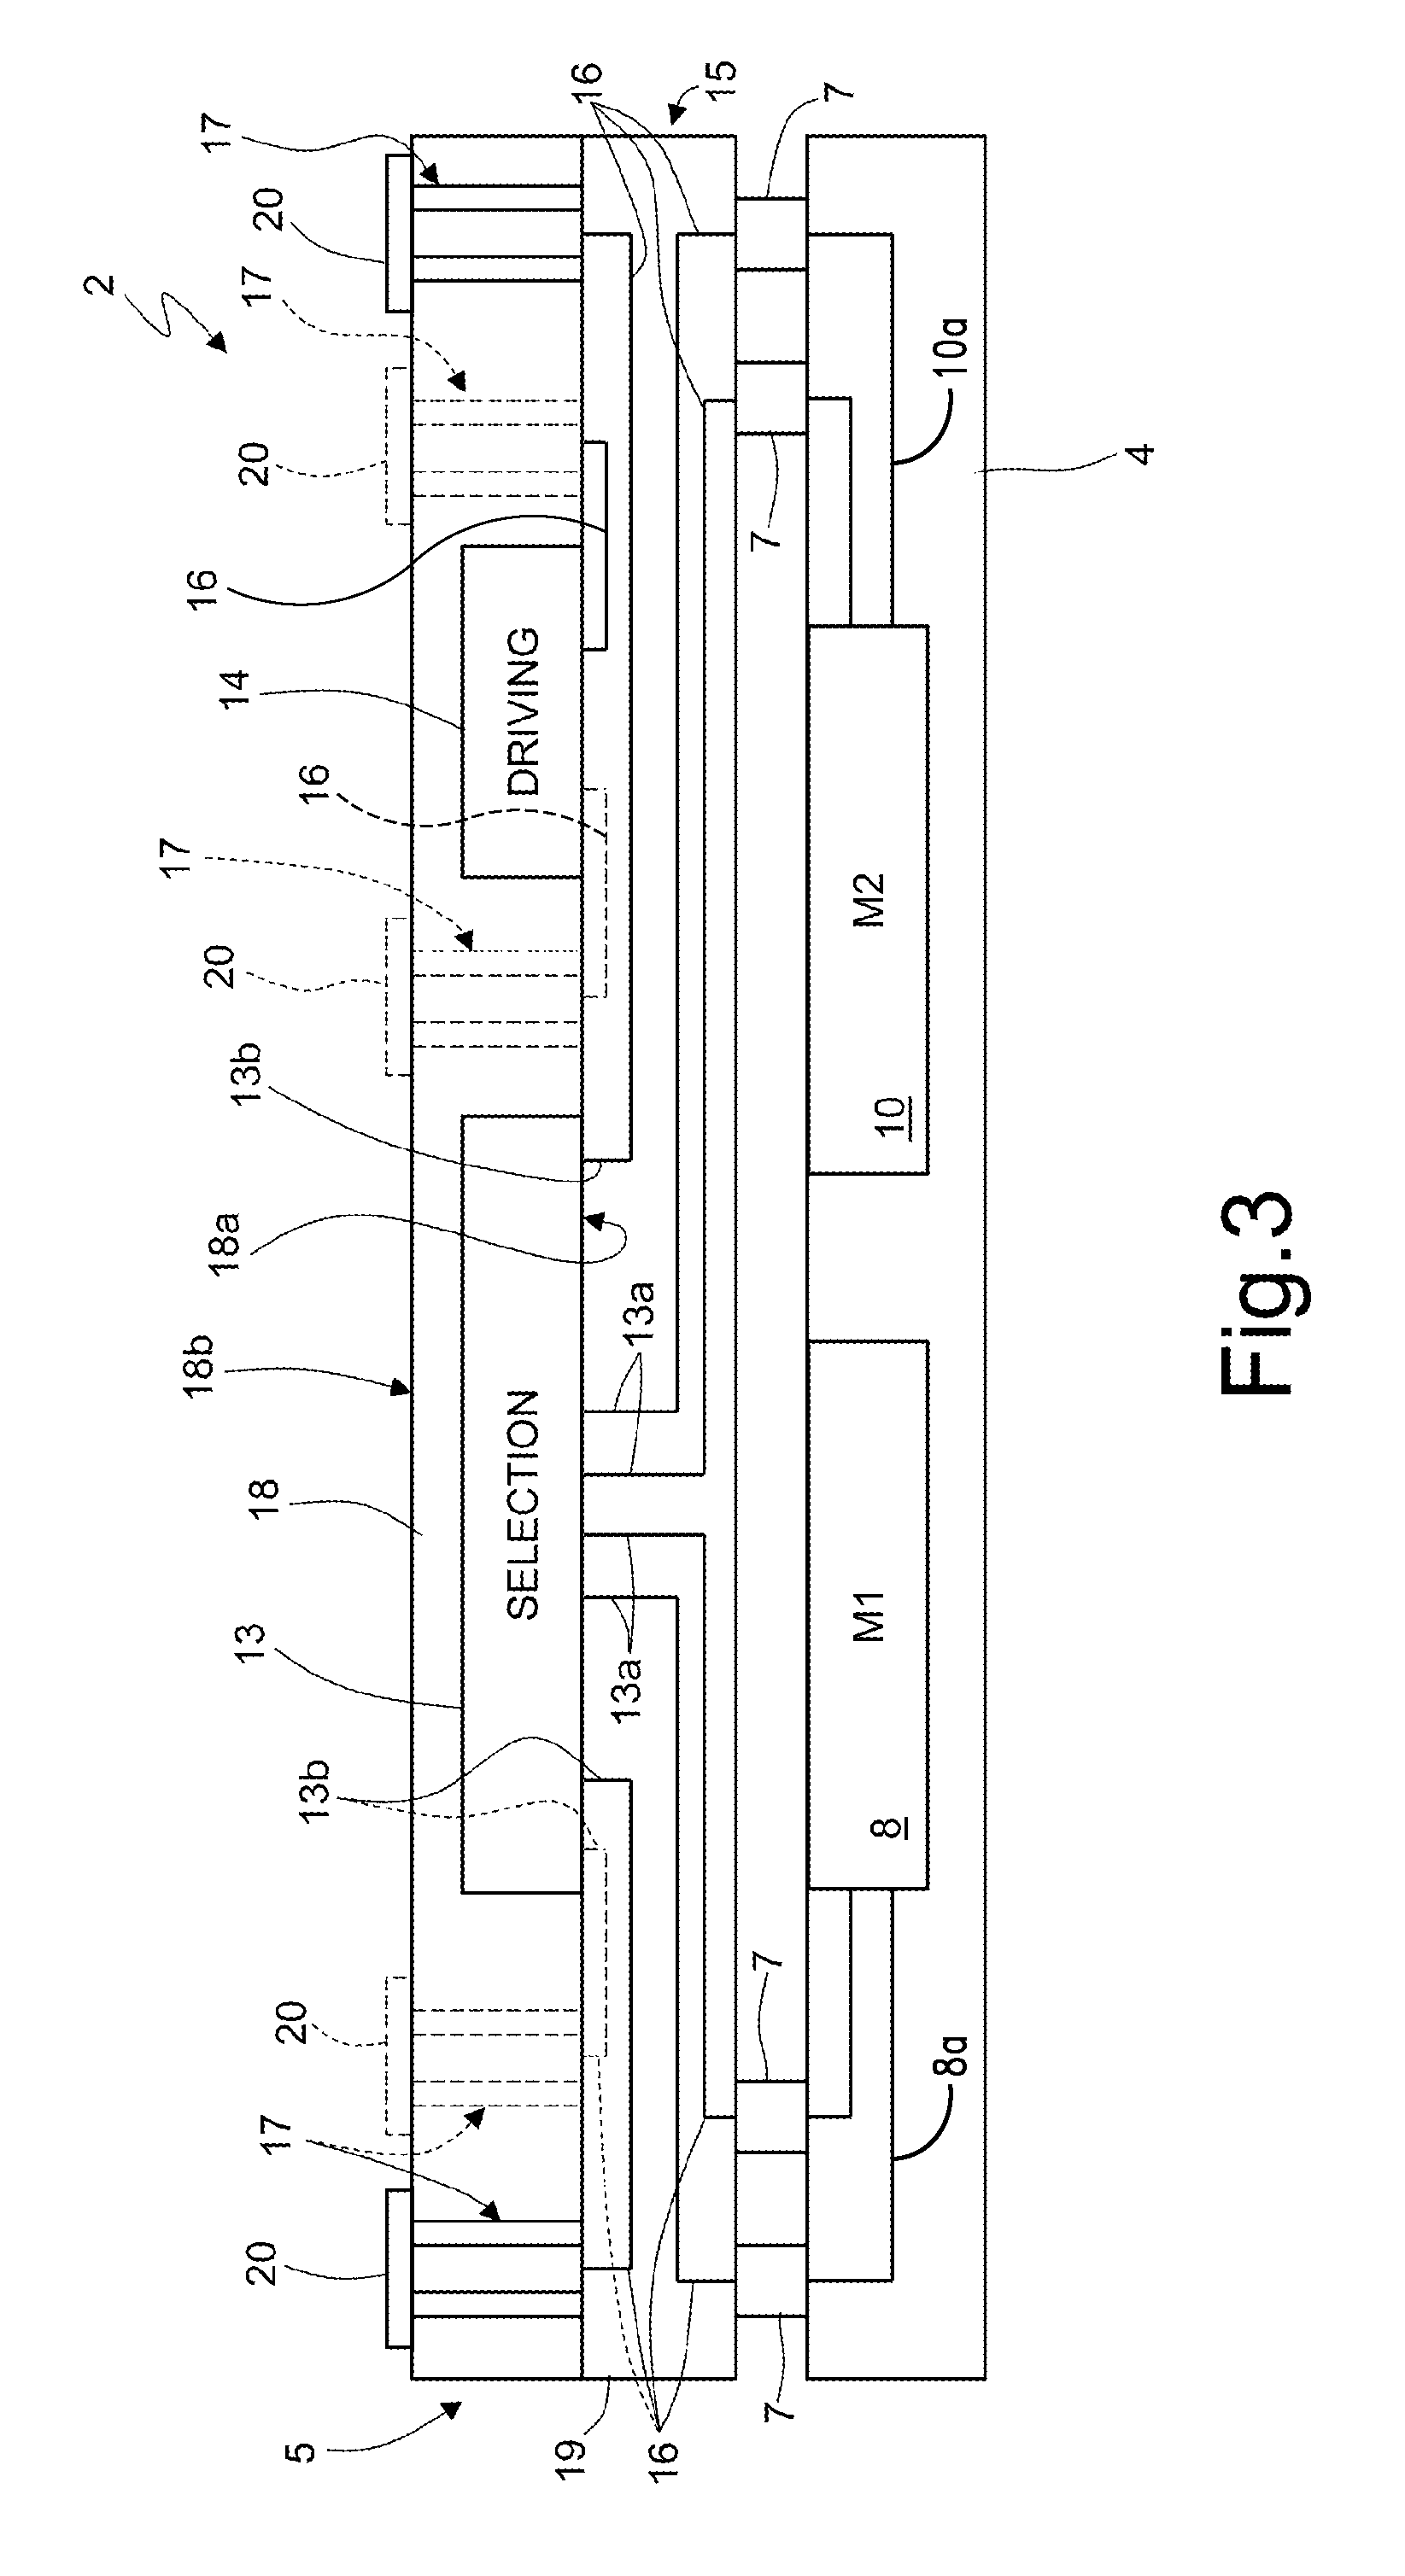 Microelectromechanical device with signal routing through a protective cap